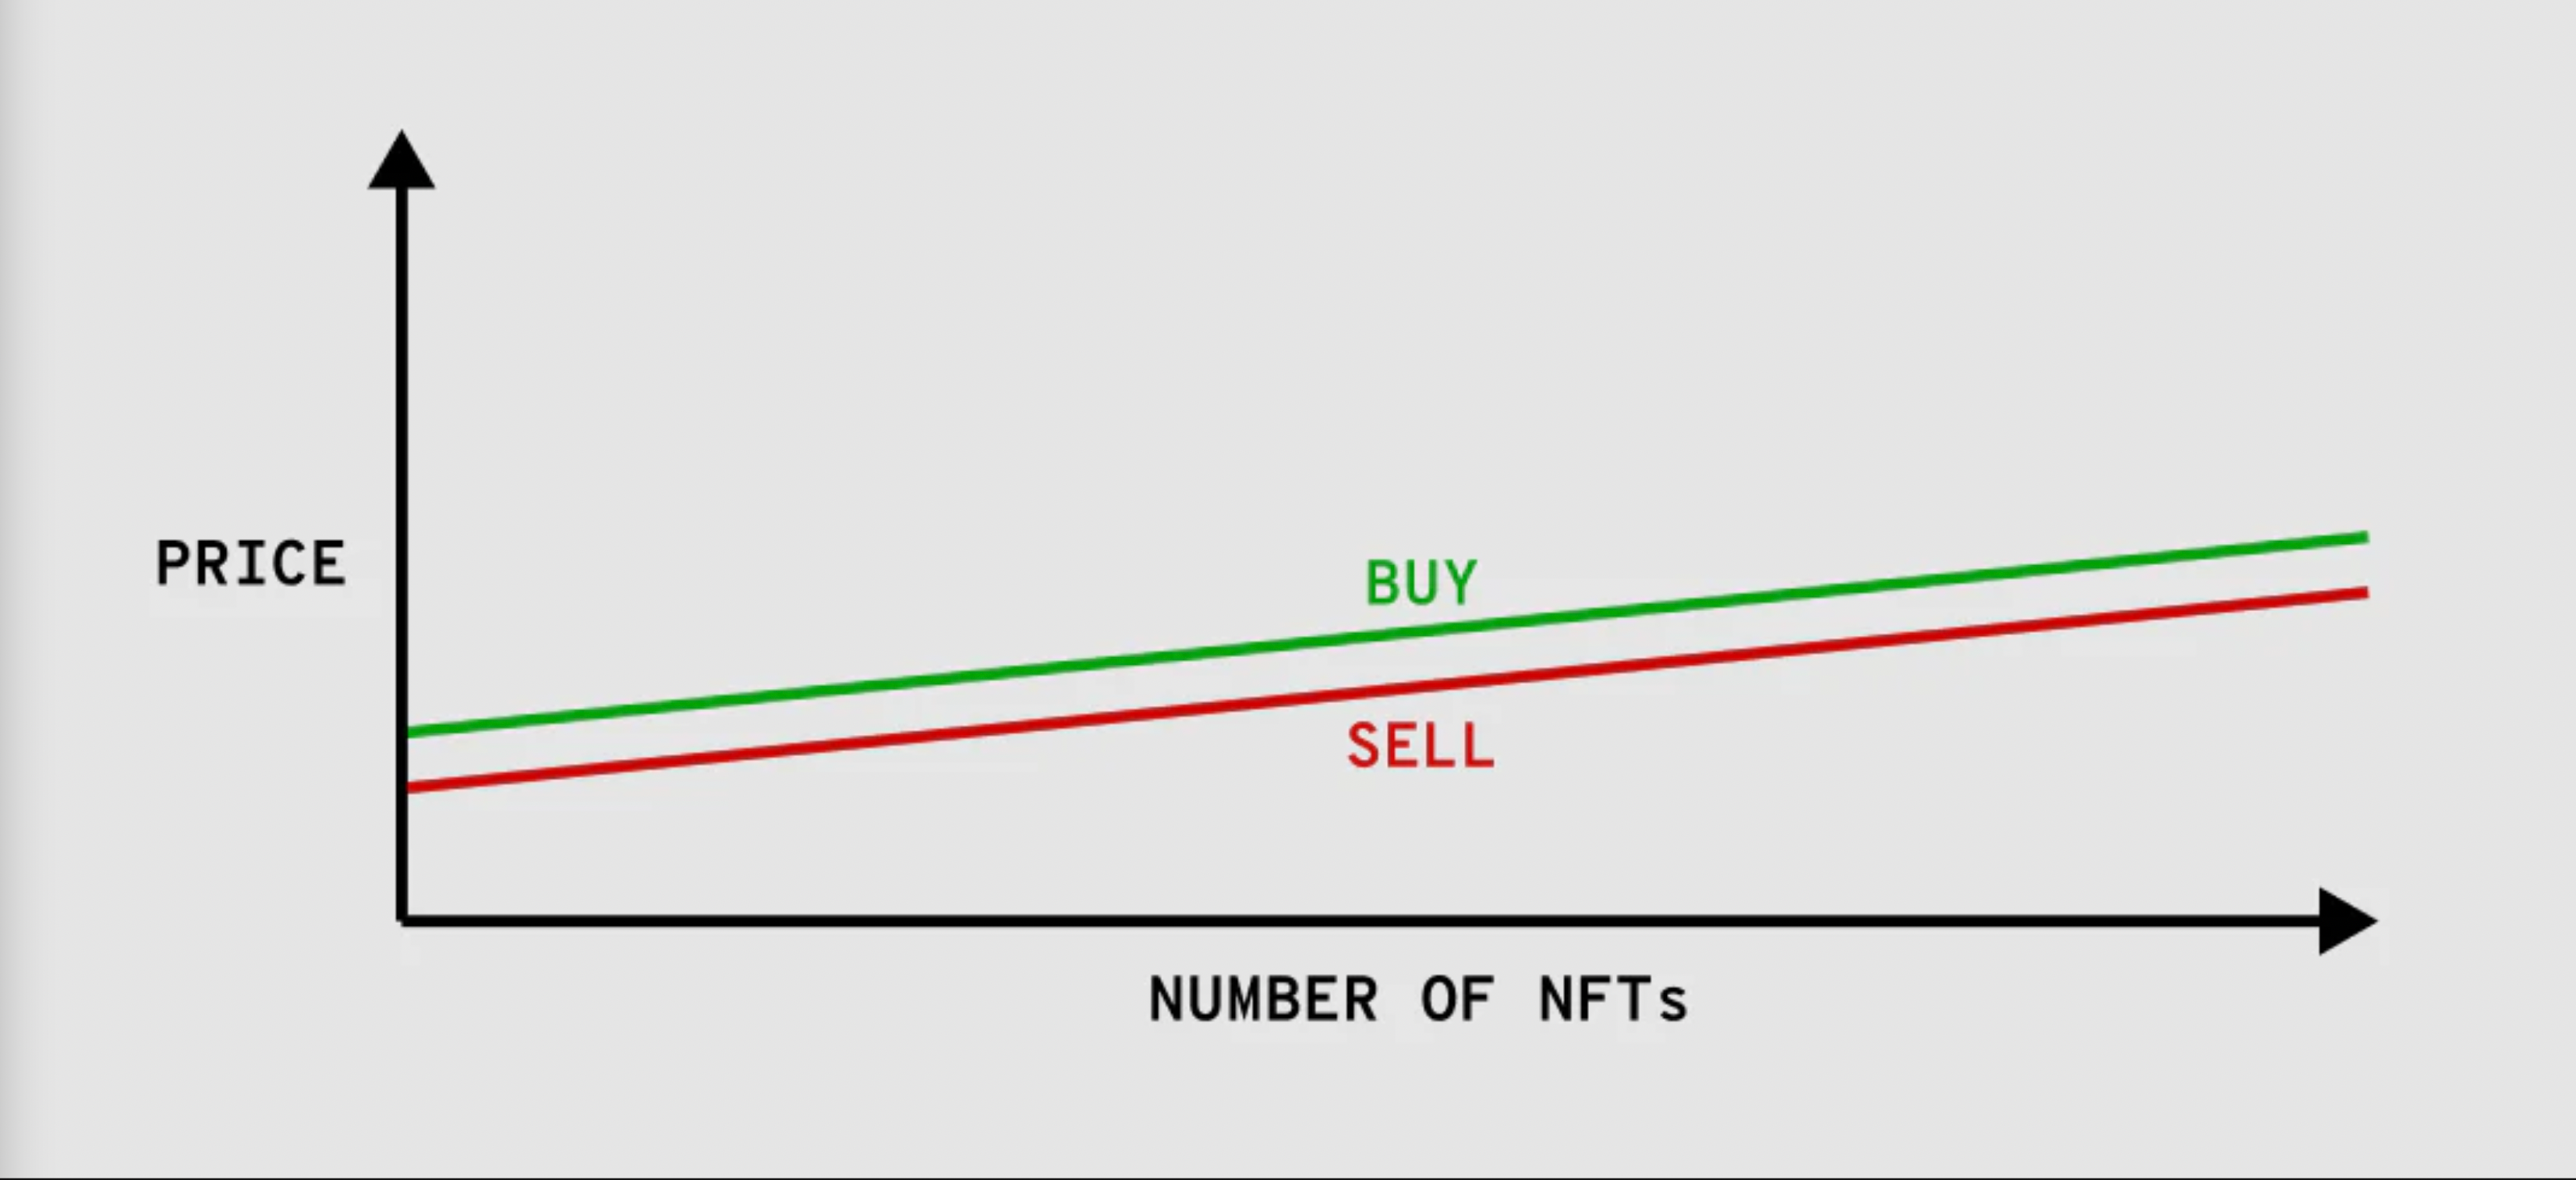 When you sell an NFT back, 10% goes to the creator.